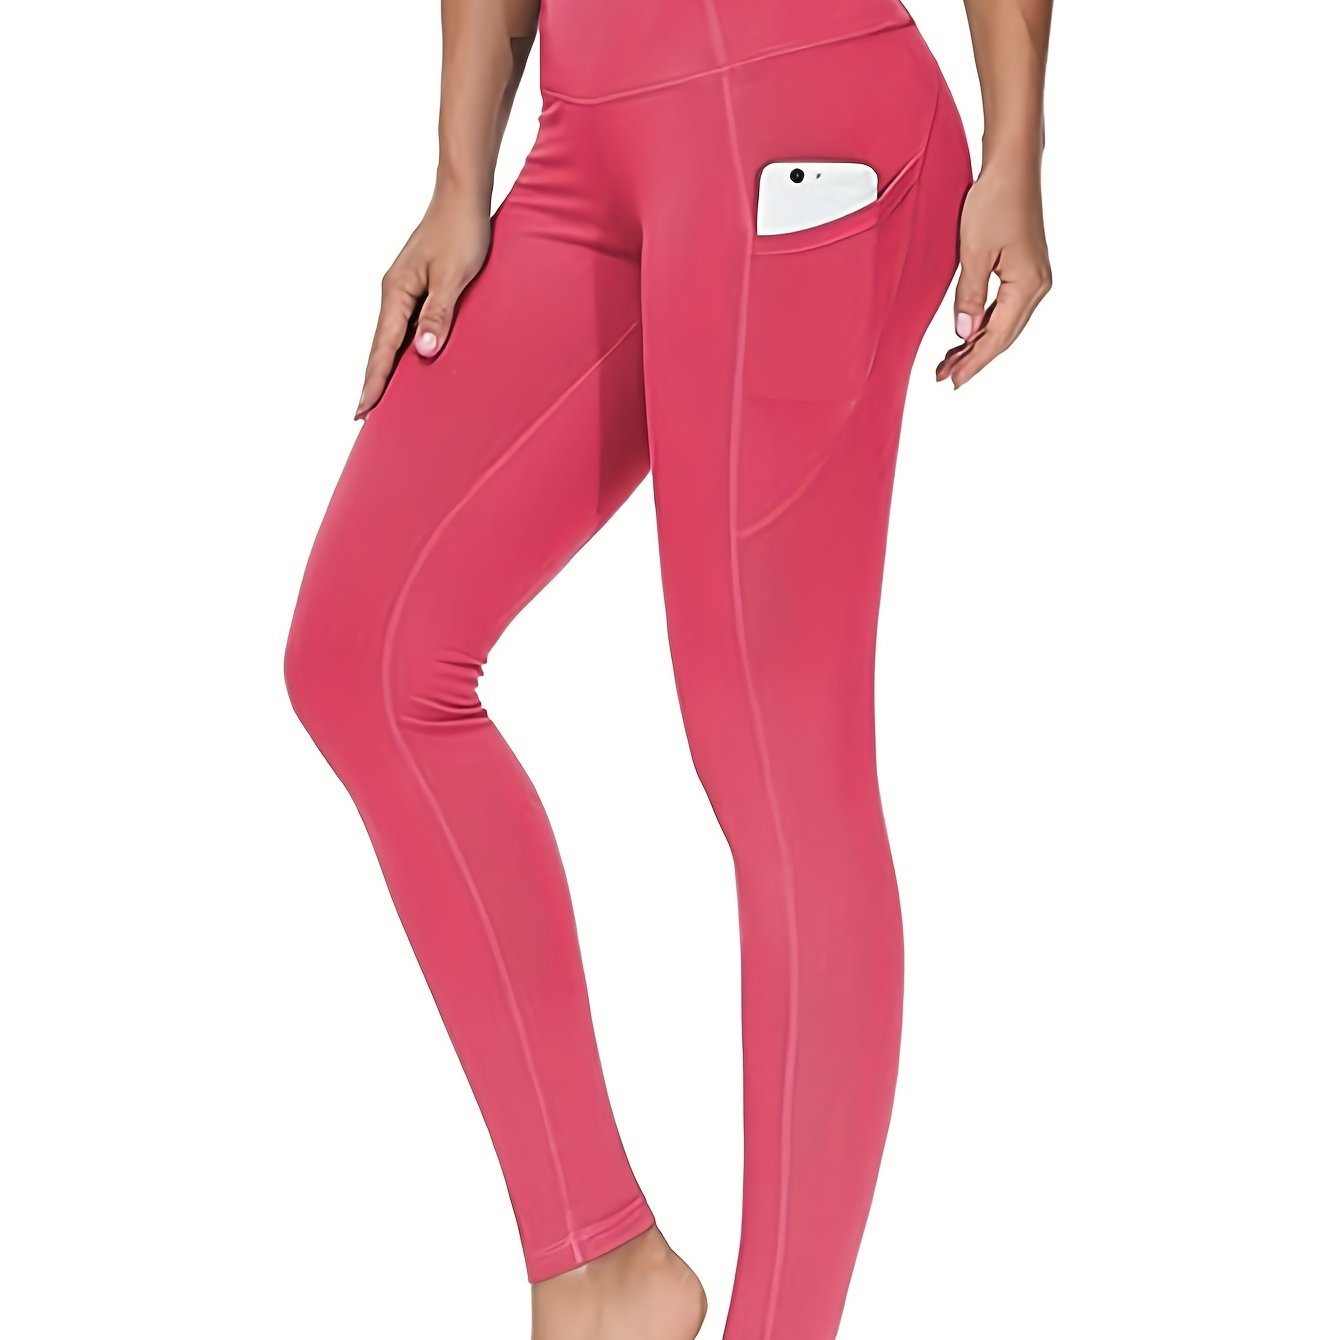 Phonepocketed Plus Size Sports Leggings High Stretch Butt Lifting Bright pink